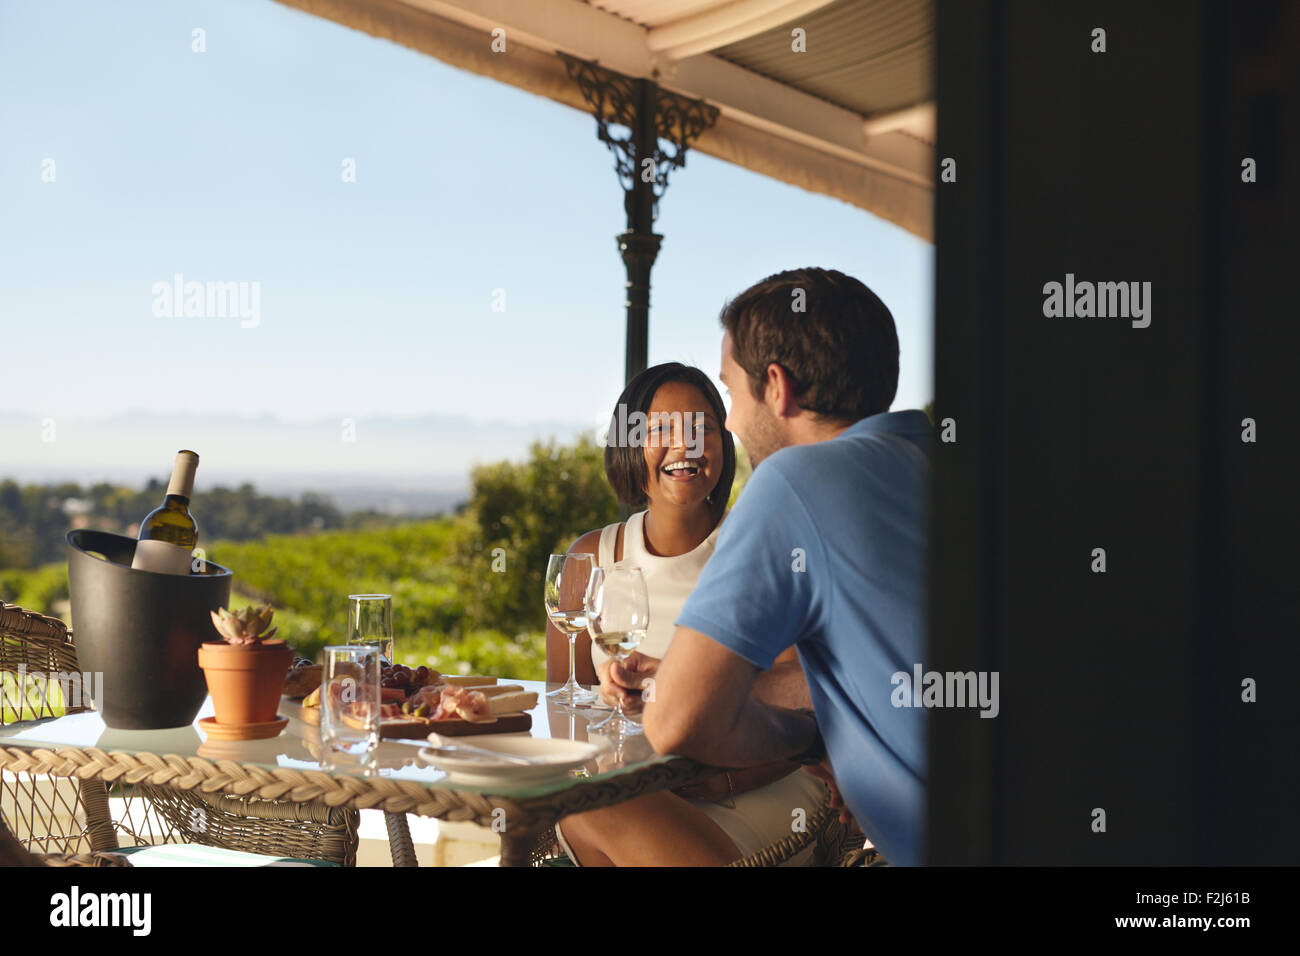 Young couple on vacation drinking wine in a restaurant in countryside. Smiling young woman with her boyfriend in a winery restau Stock Photo